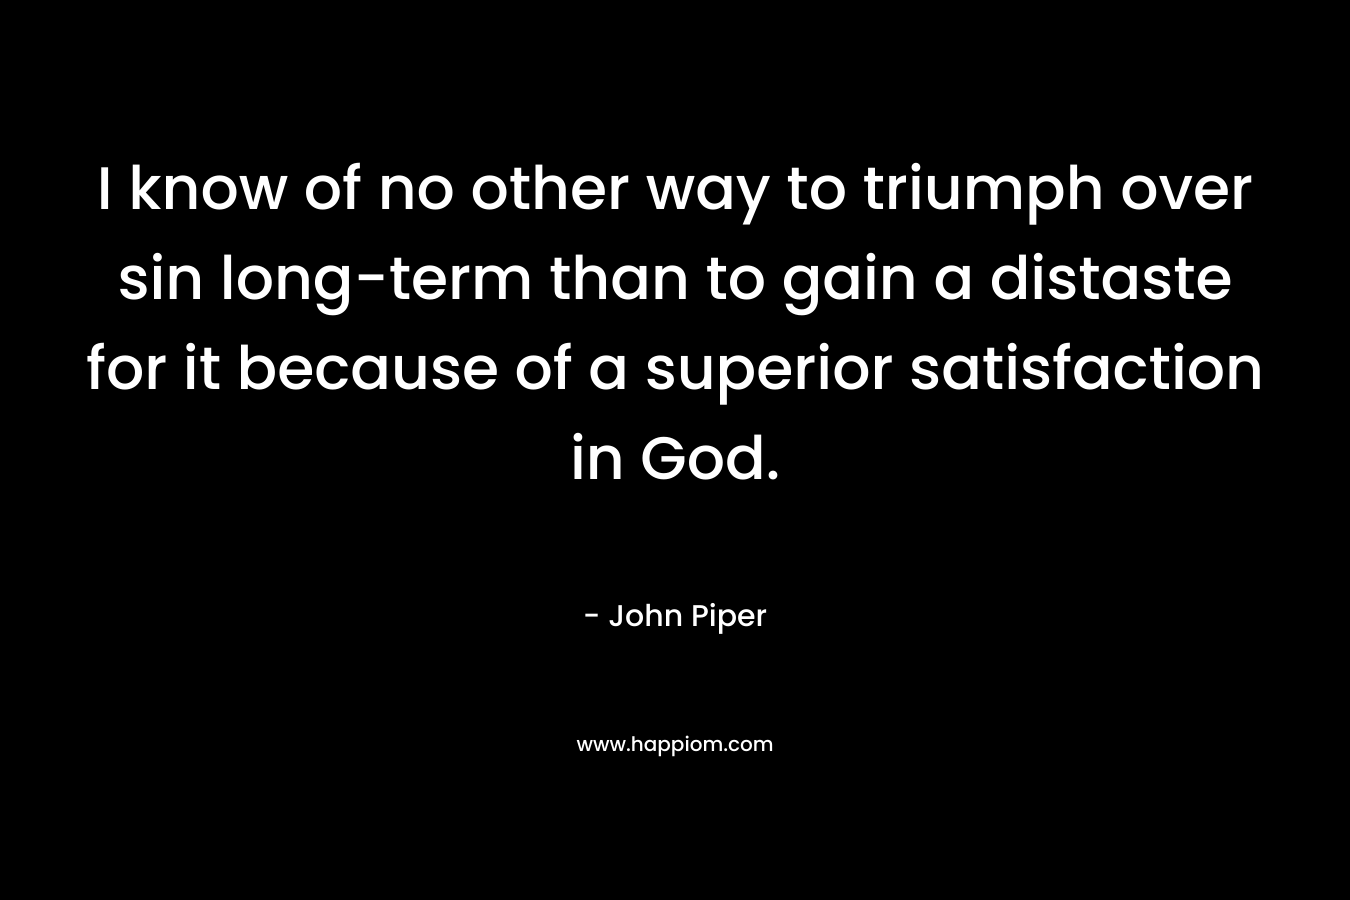 I know of no other way to triumph over sin long-term than to gain a distaste for it because of a superior satisfaction in God. – John Piper